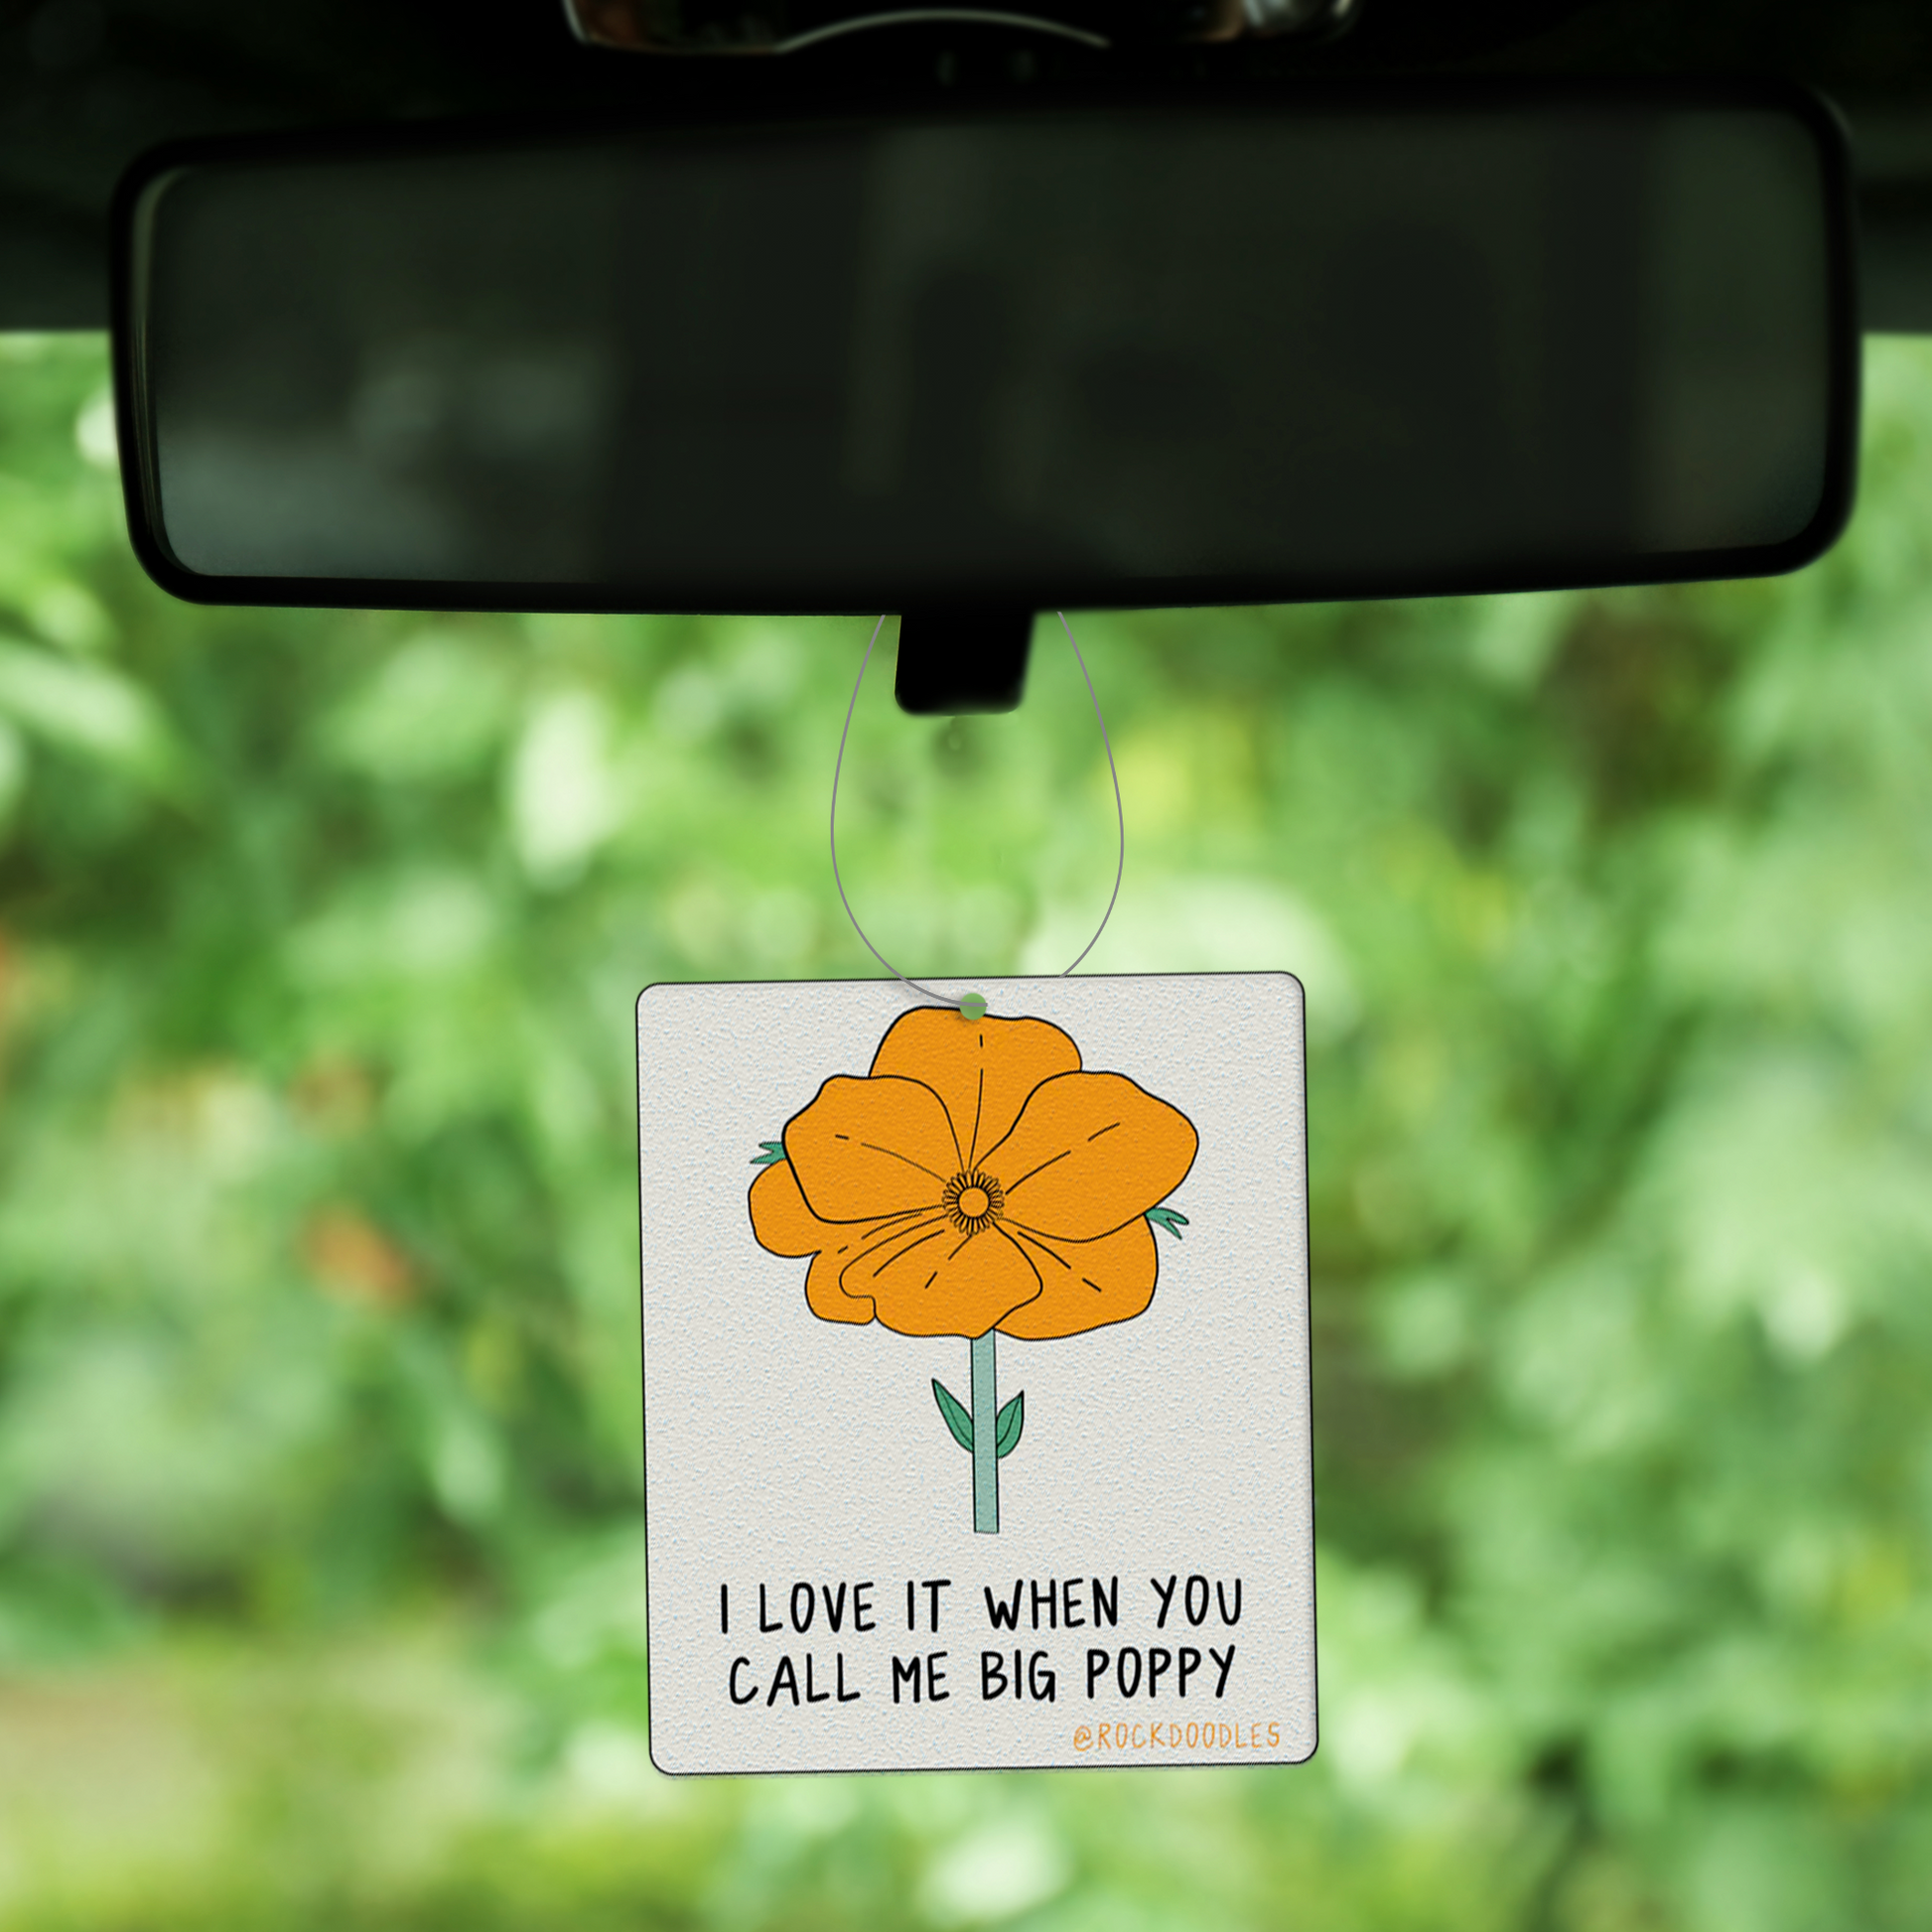 I love it when you call me Big Poppy (2-Pack) Punny Air Freshener - Hawaiian Plumeria Scent by rockdoodles.